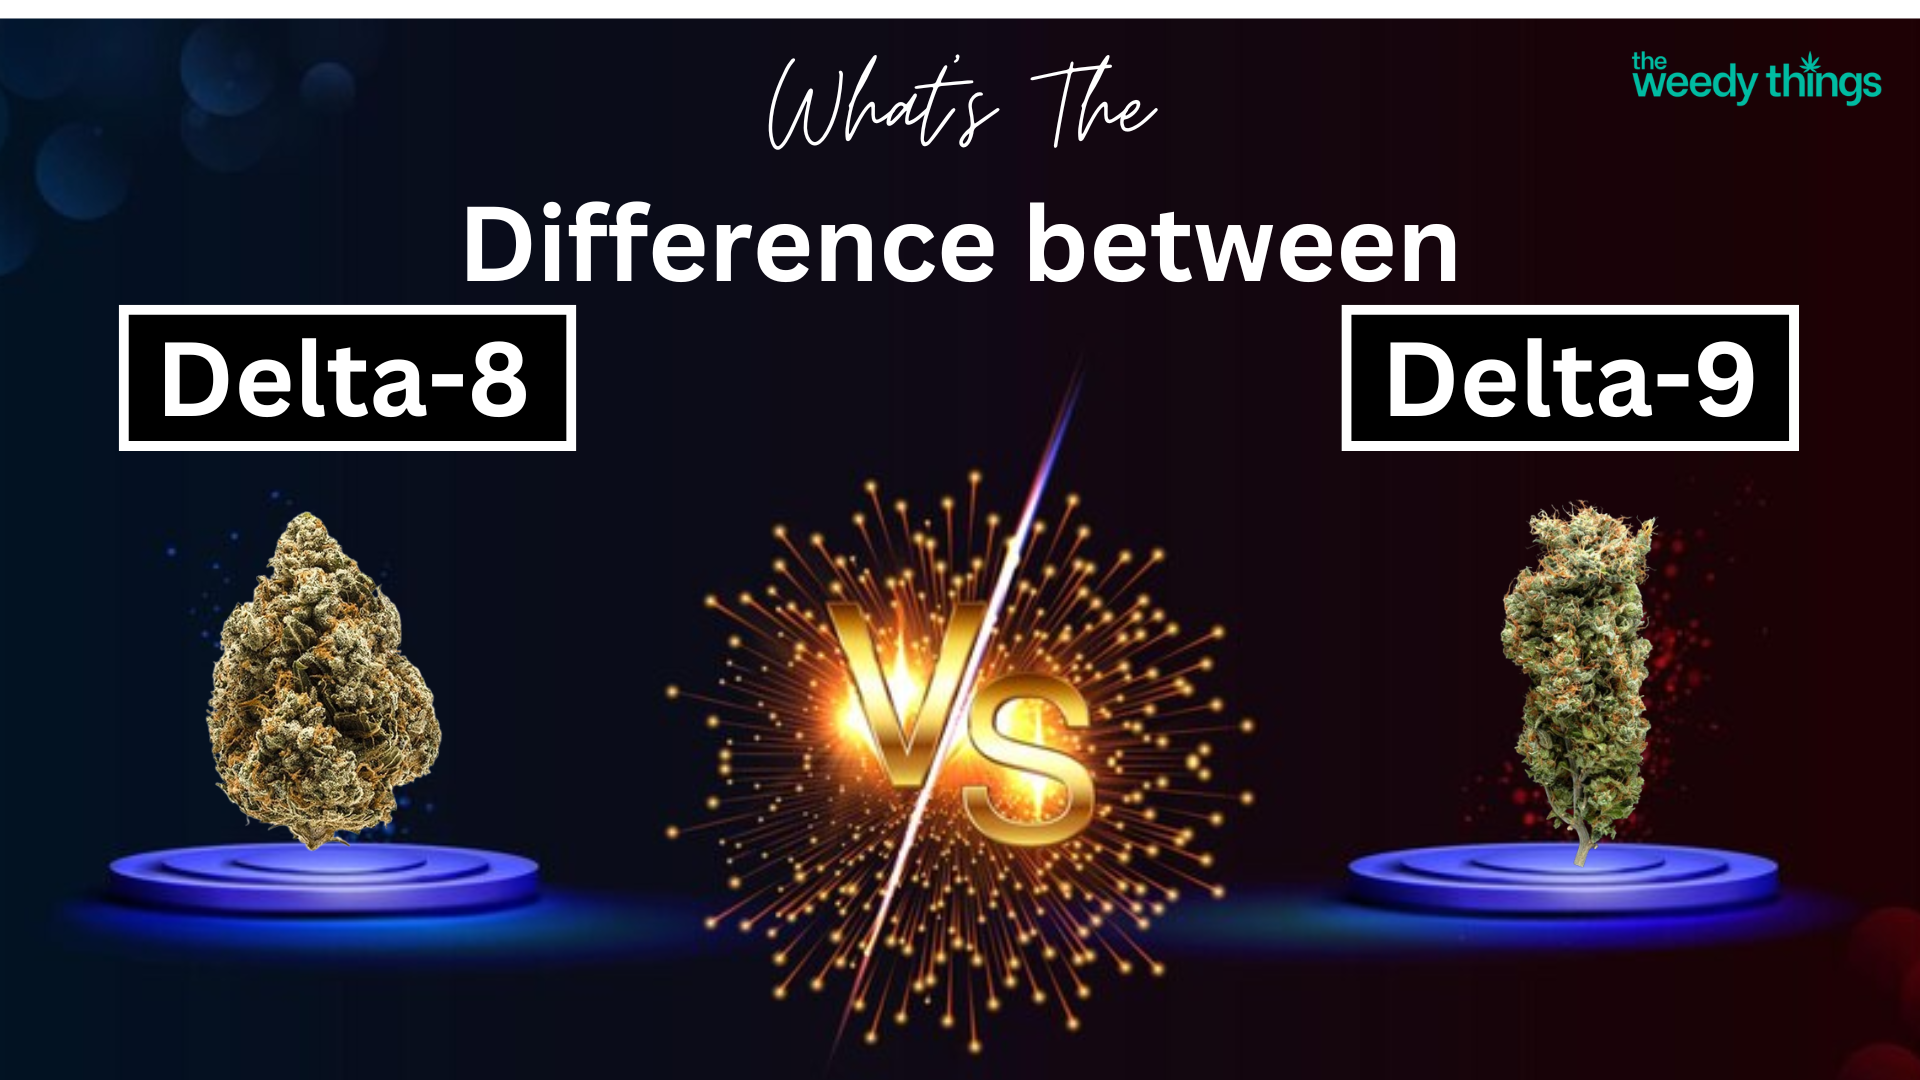 What’s The Difference between Delta-8 vs. Delta-9?